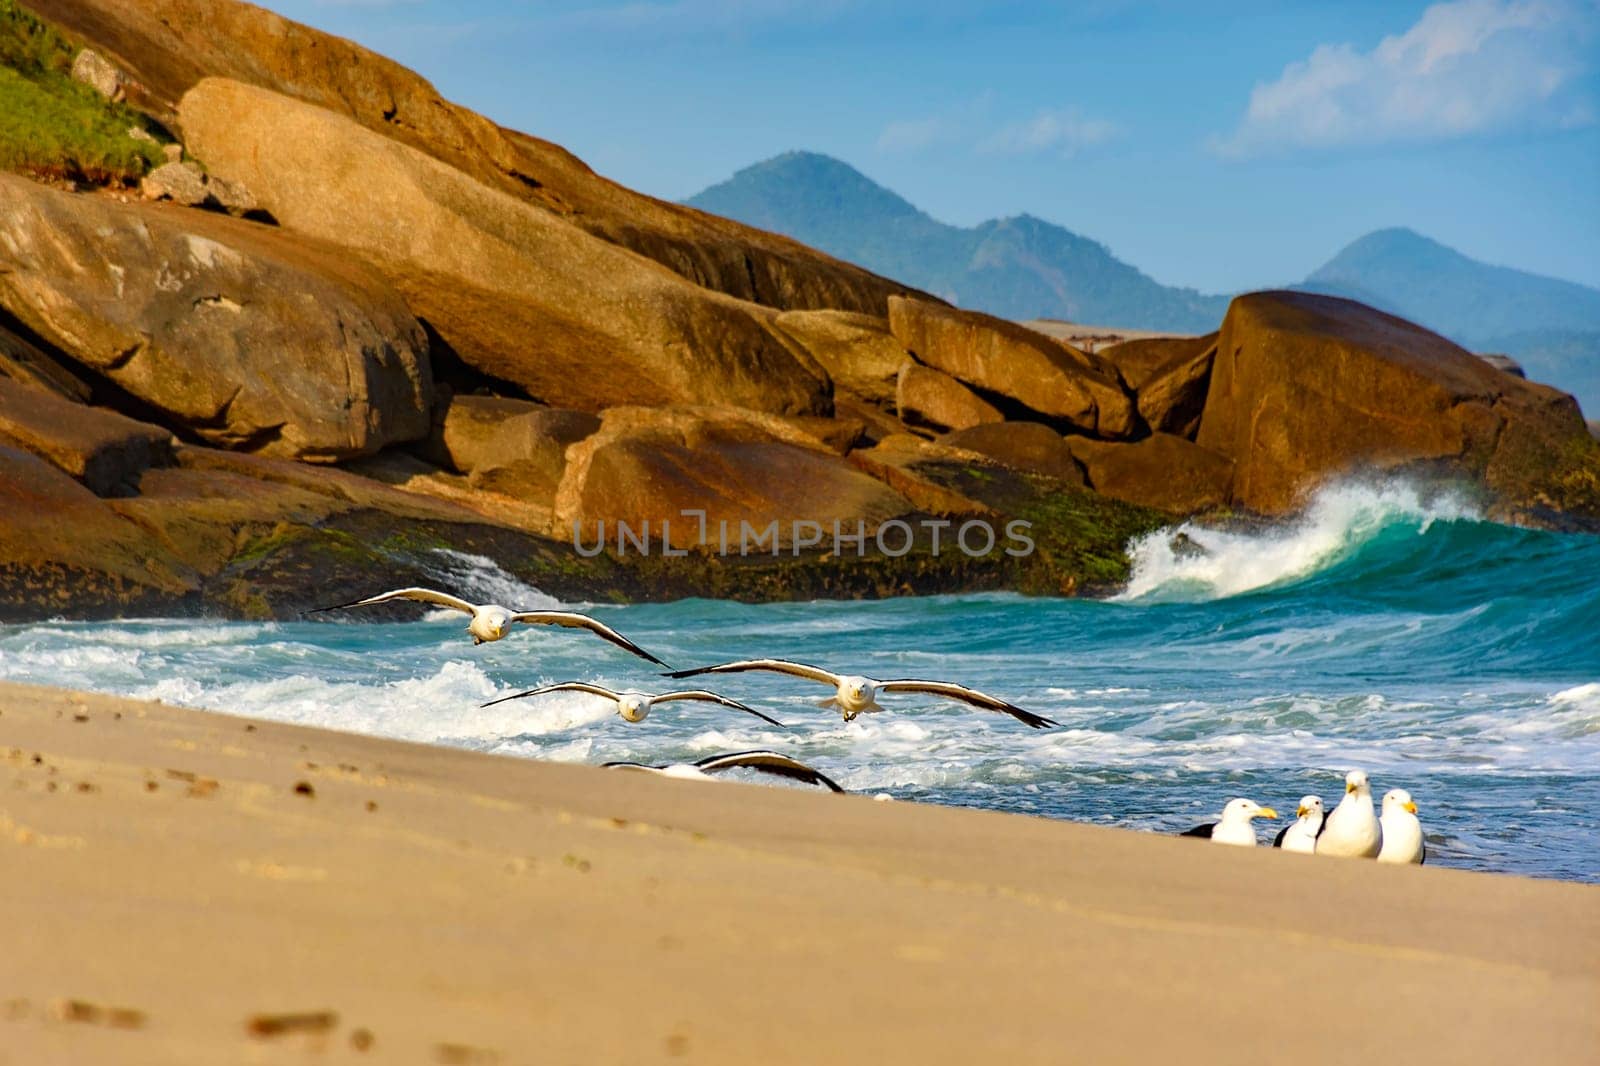 Seagulls flying over the sand of the beach by Fred_Pinheiro